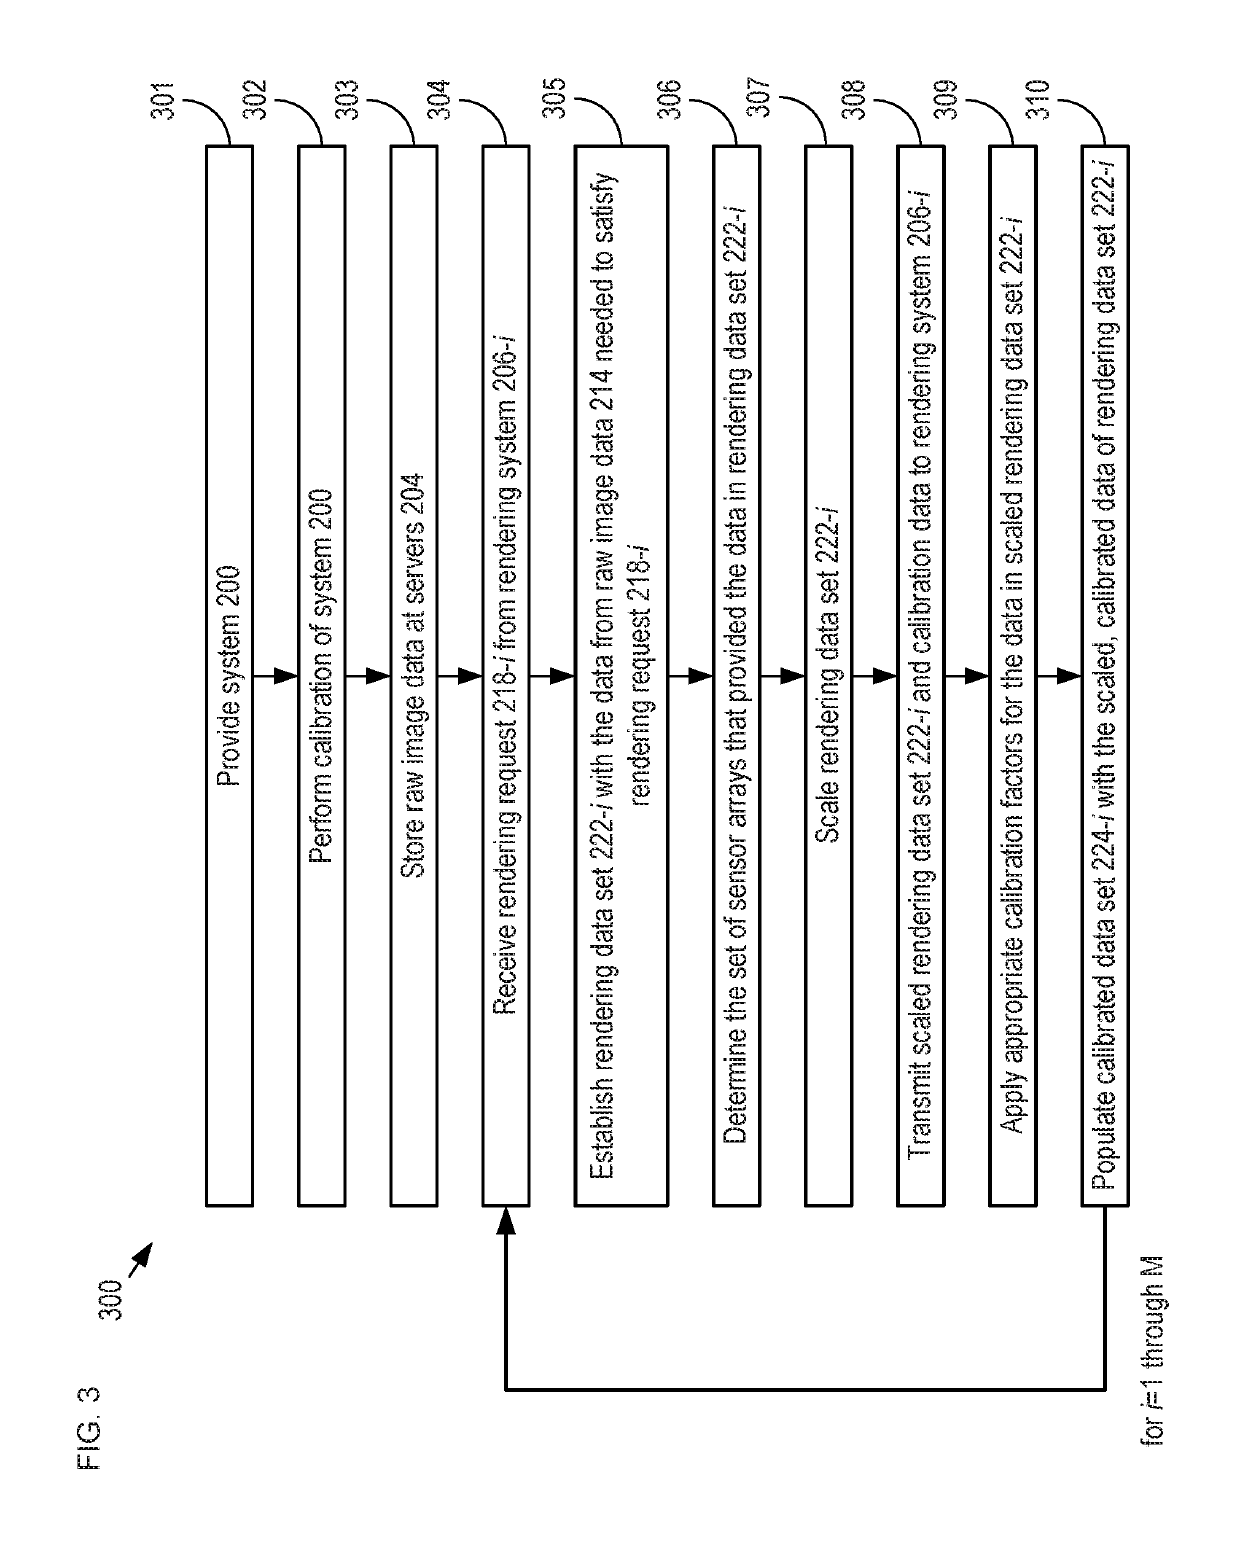 Multi-array camera imaging system and method therefor